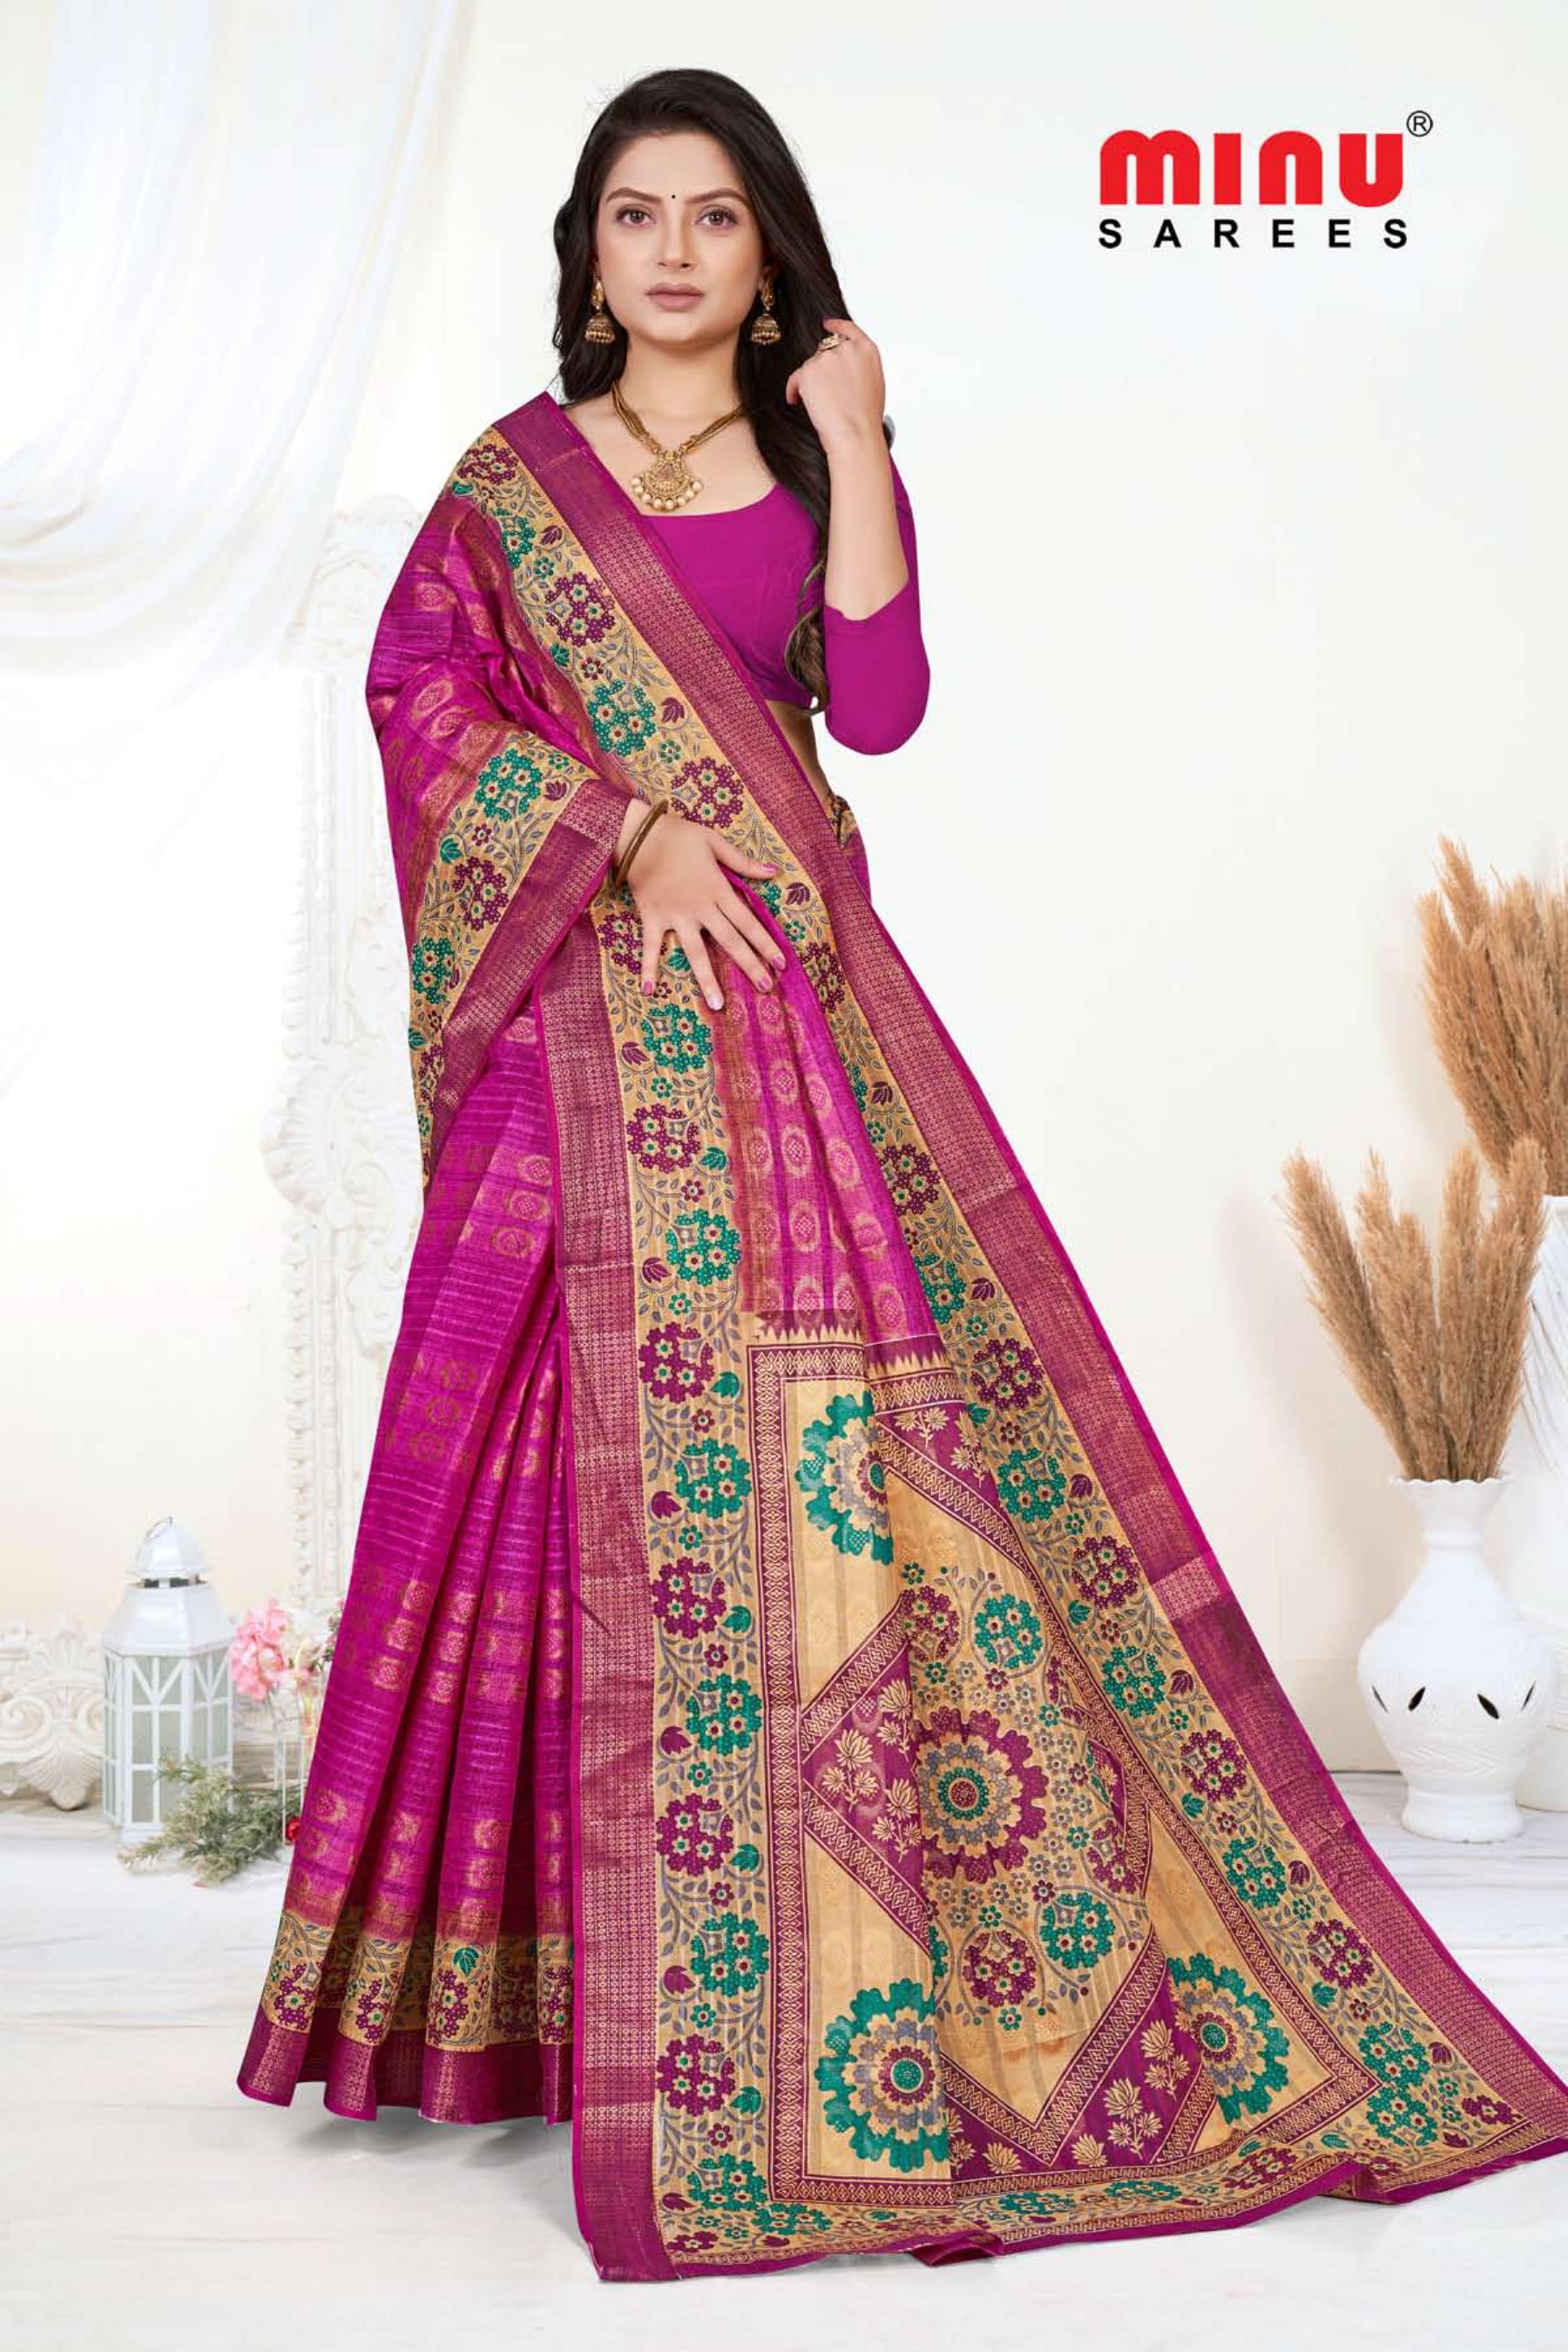 Image of various pure cotton sarees available to buy online